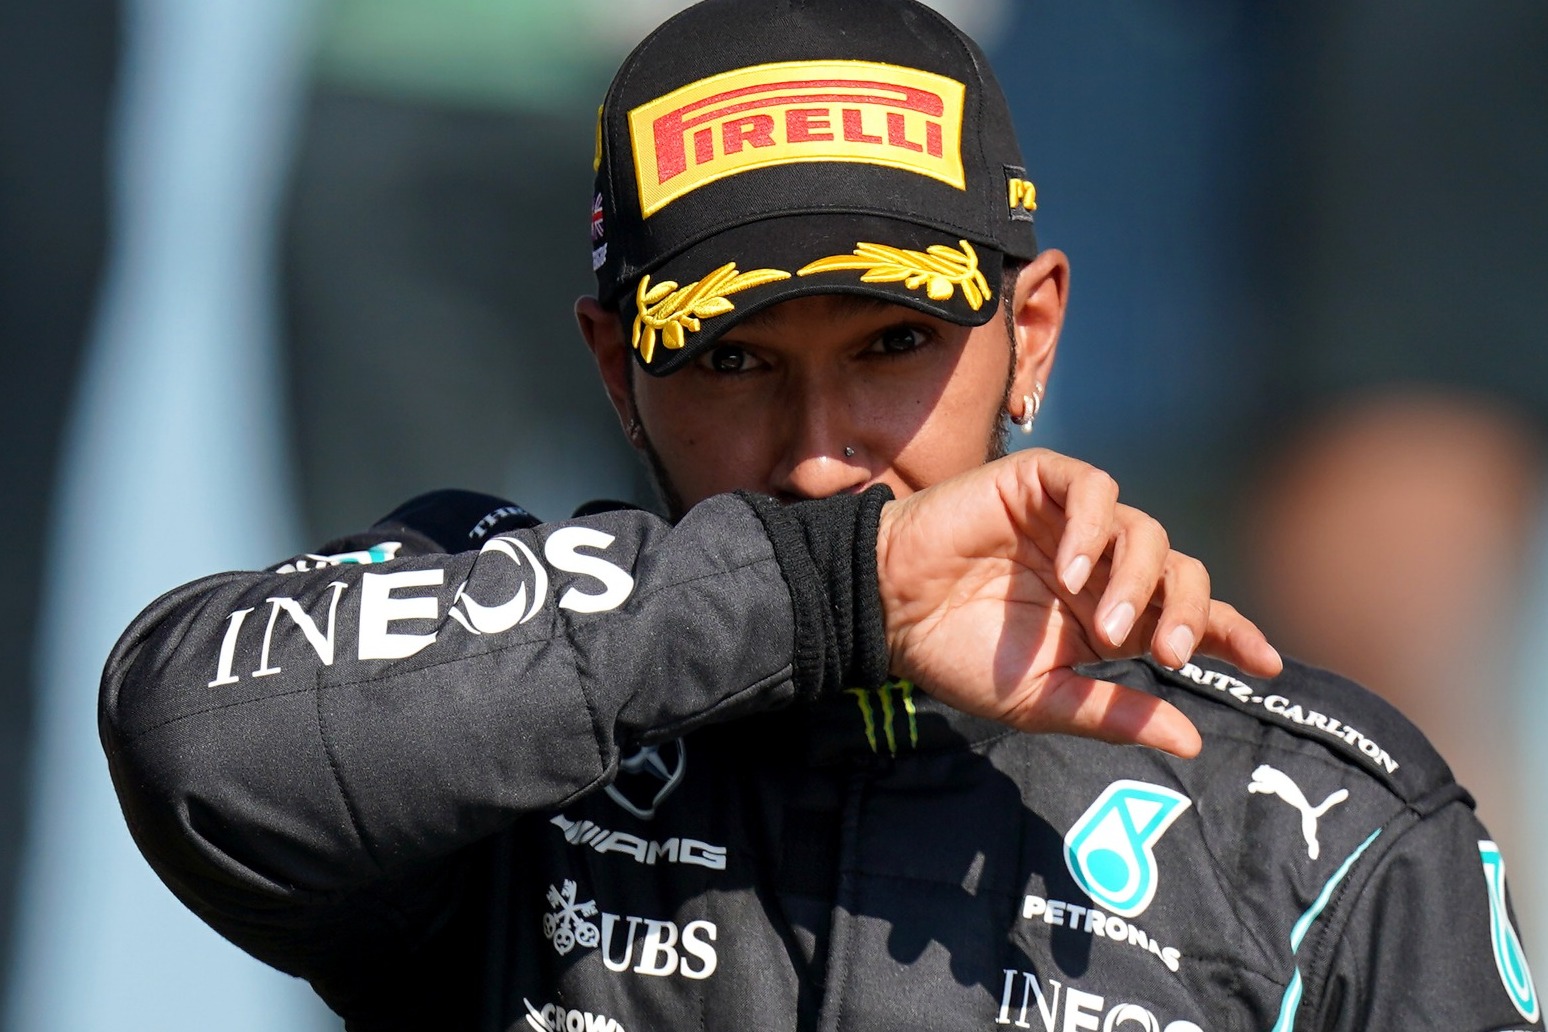 Lewis Hamilton hoping to emerge unscathed from United States GP opening corner 